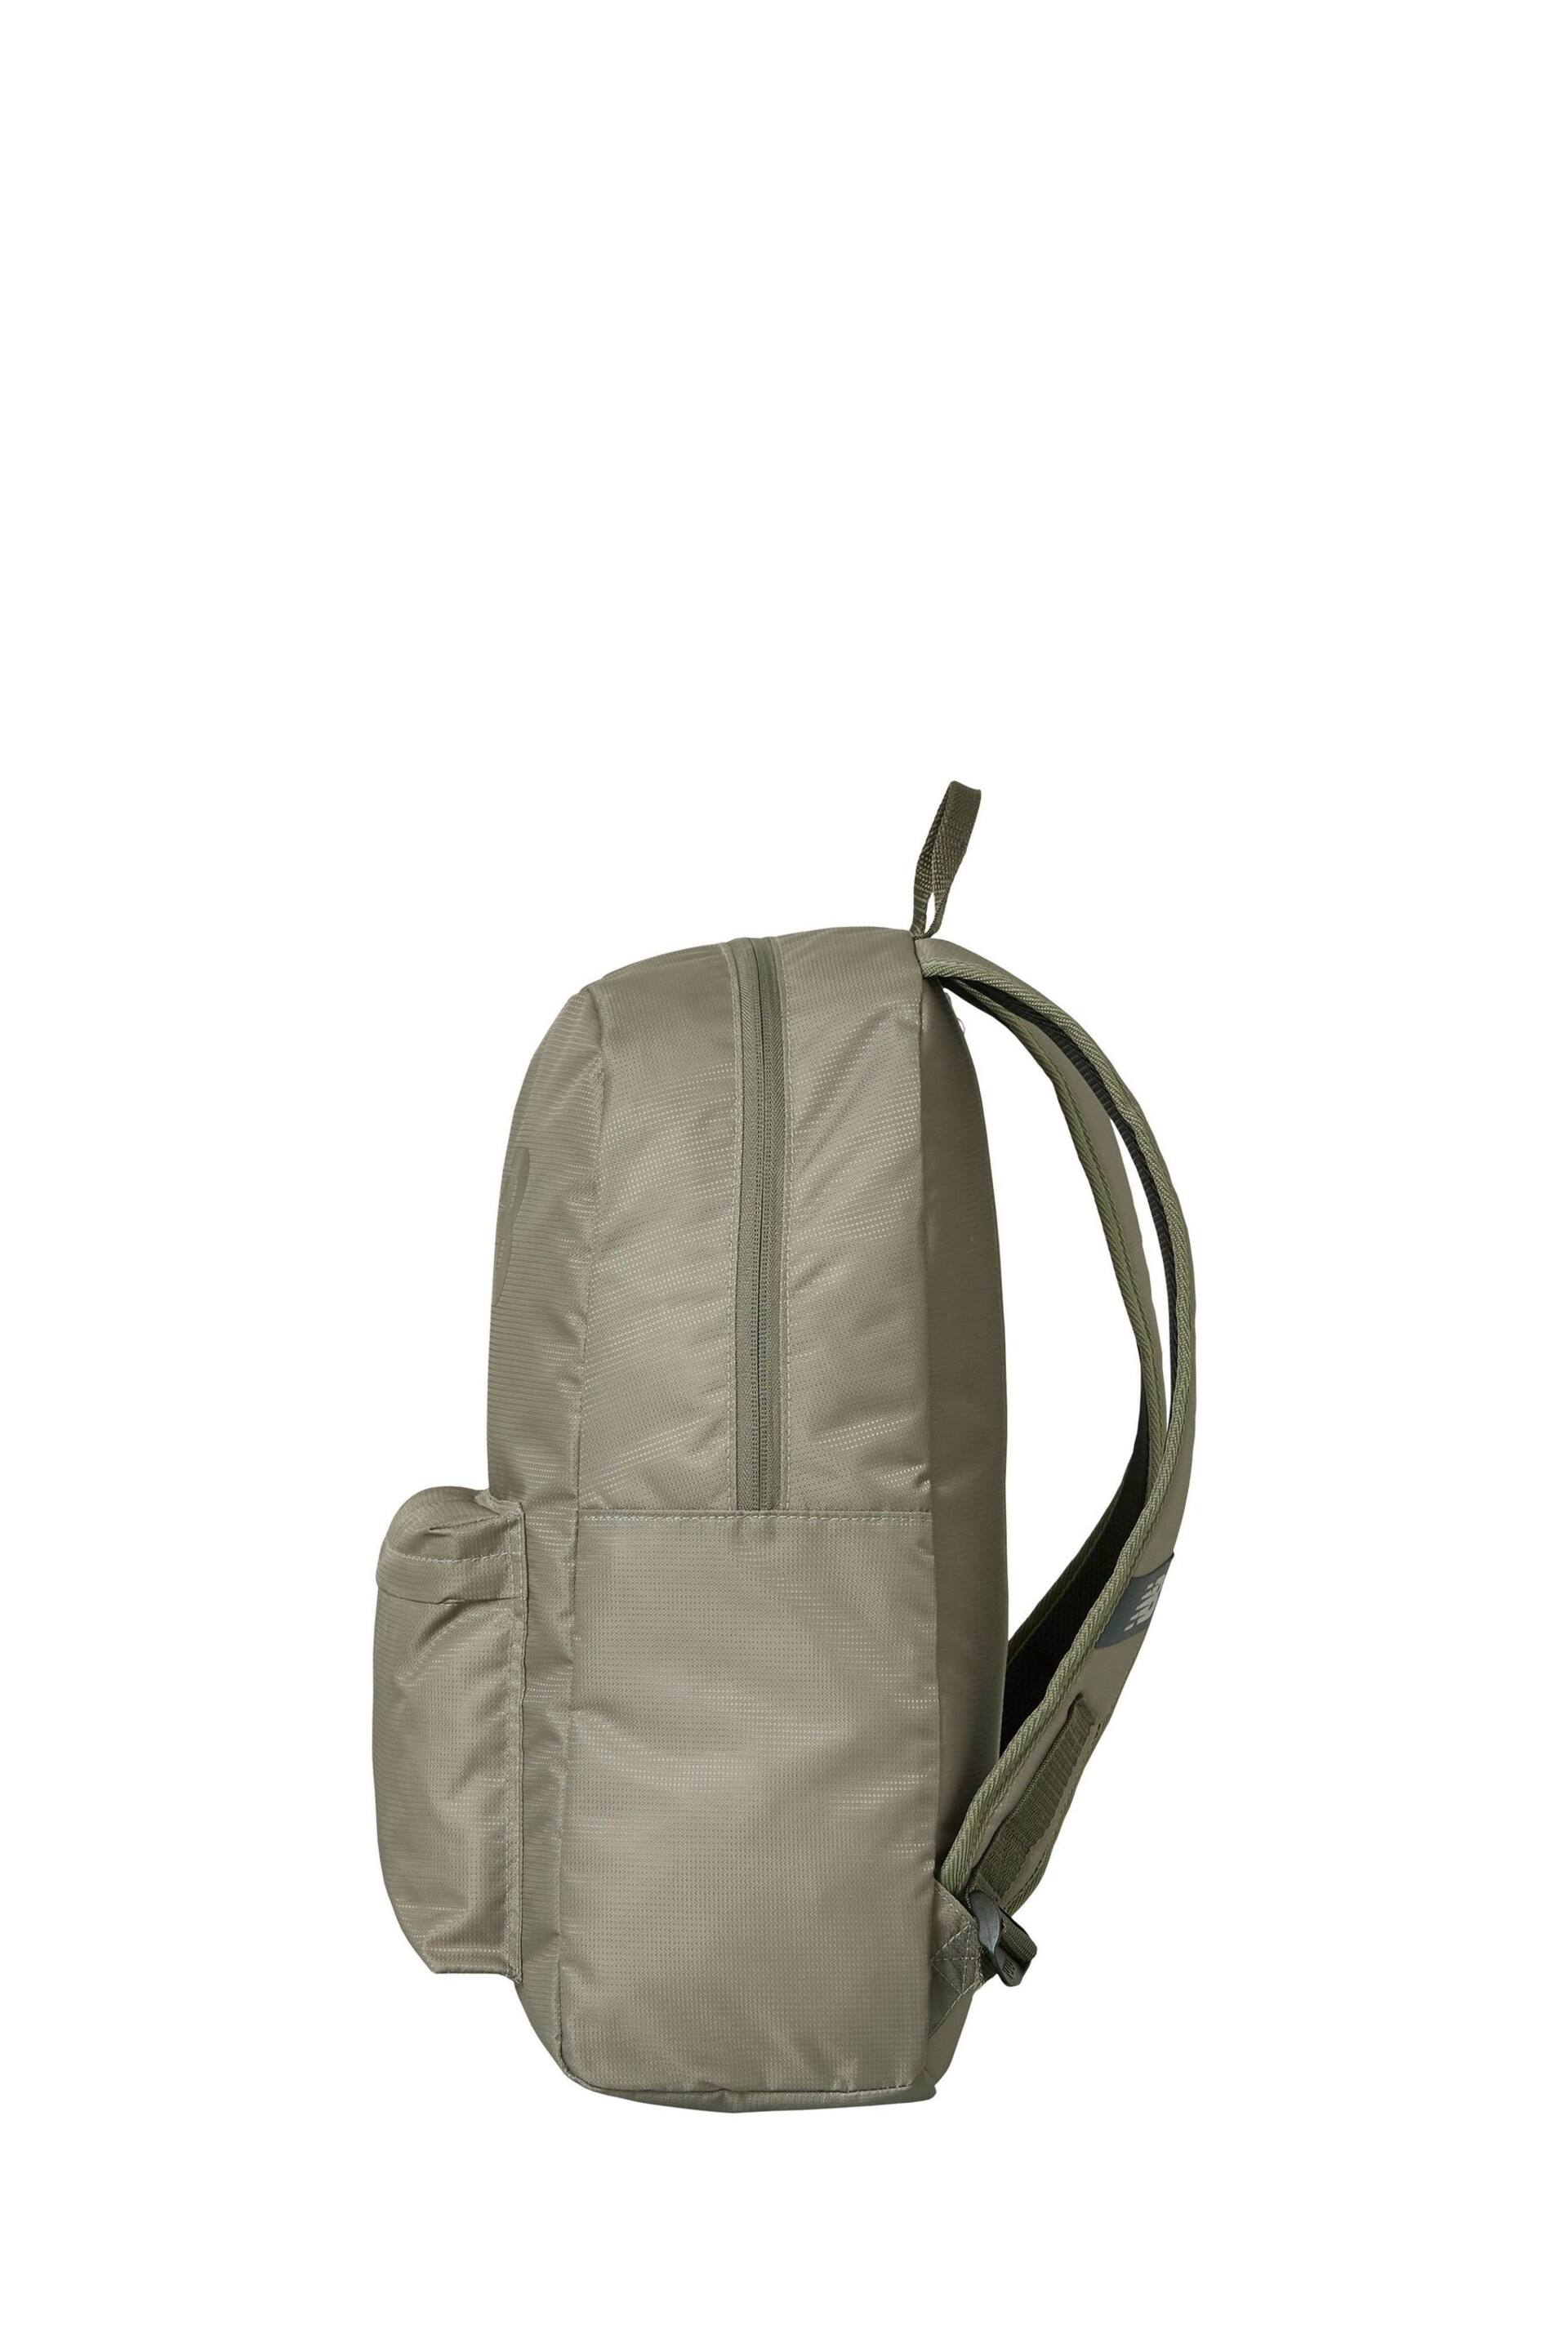 New Balance Green Opp Core Performance Backpack - Image 4 of 4